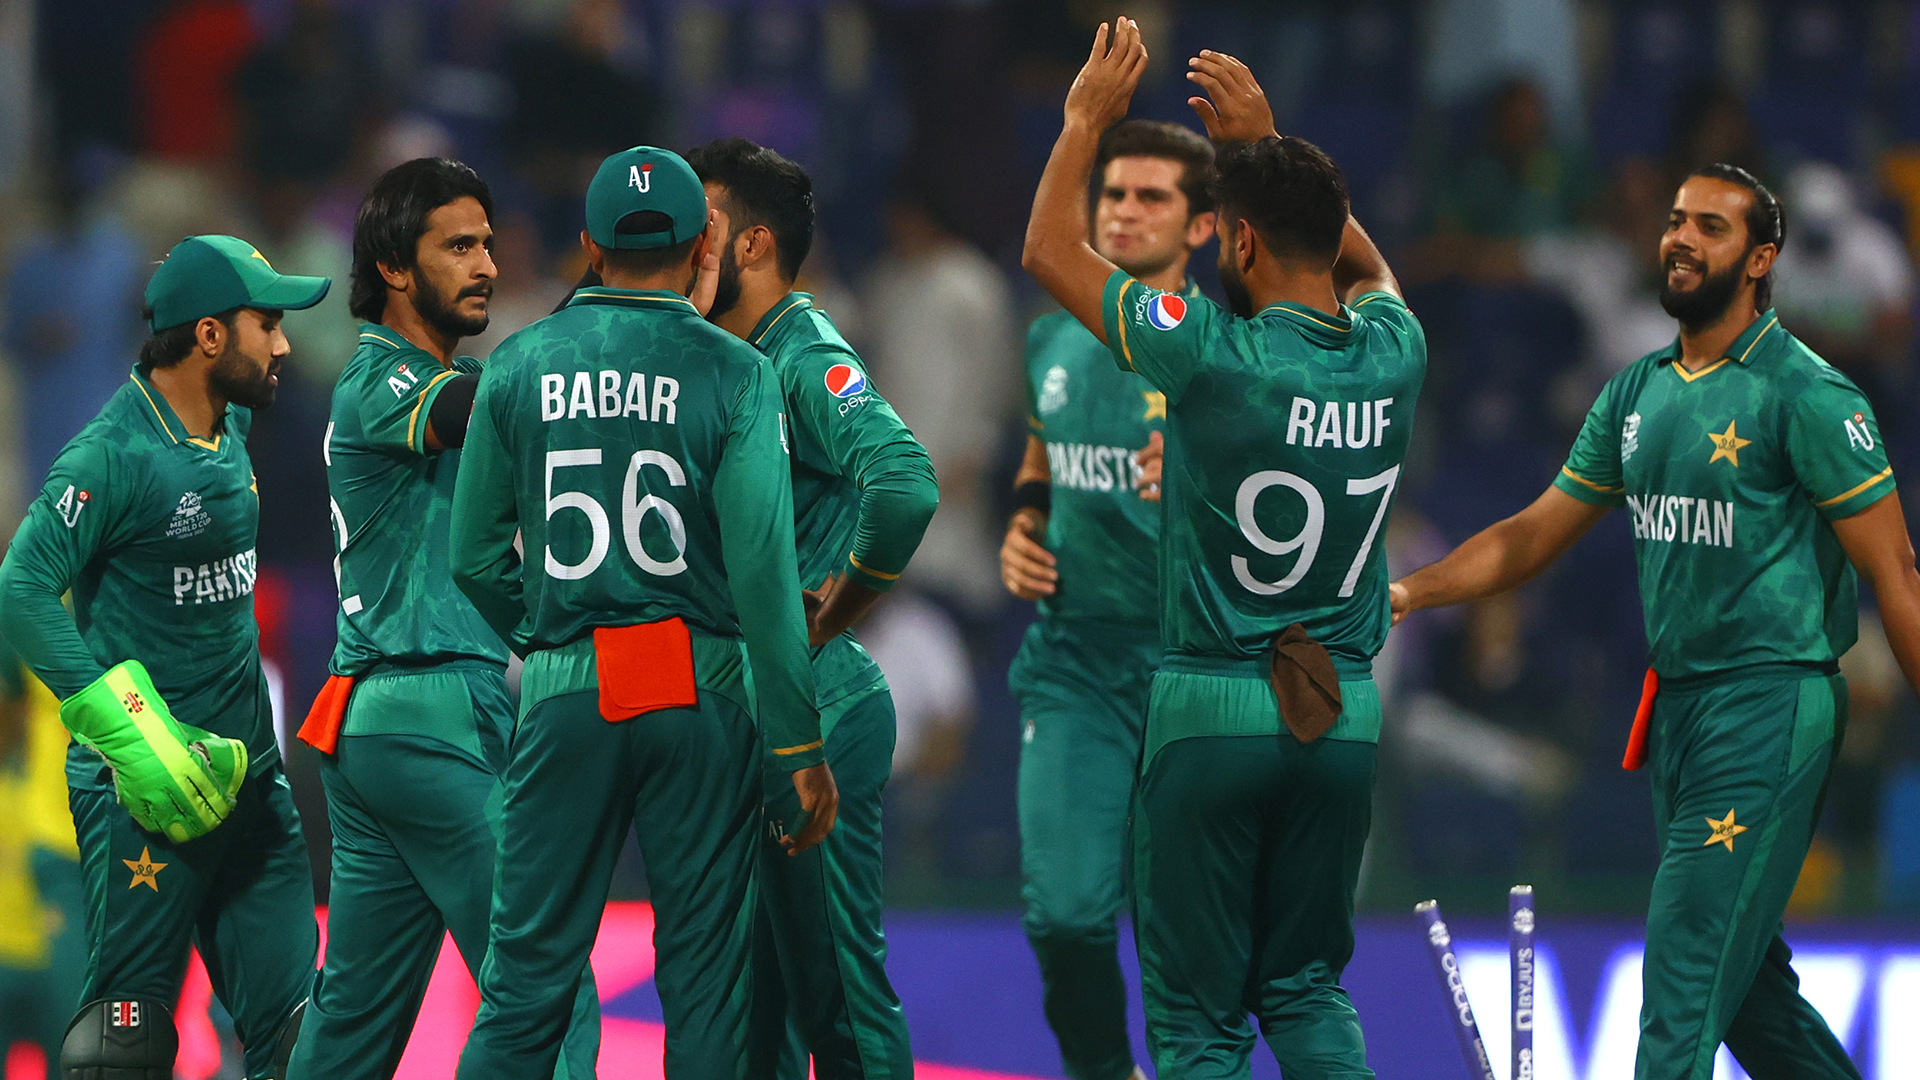 PCB Cash Incentive: PCB to honour Babar Azam & Co with cash incentives for exceptional performance in T20 WC, South Africa